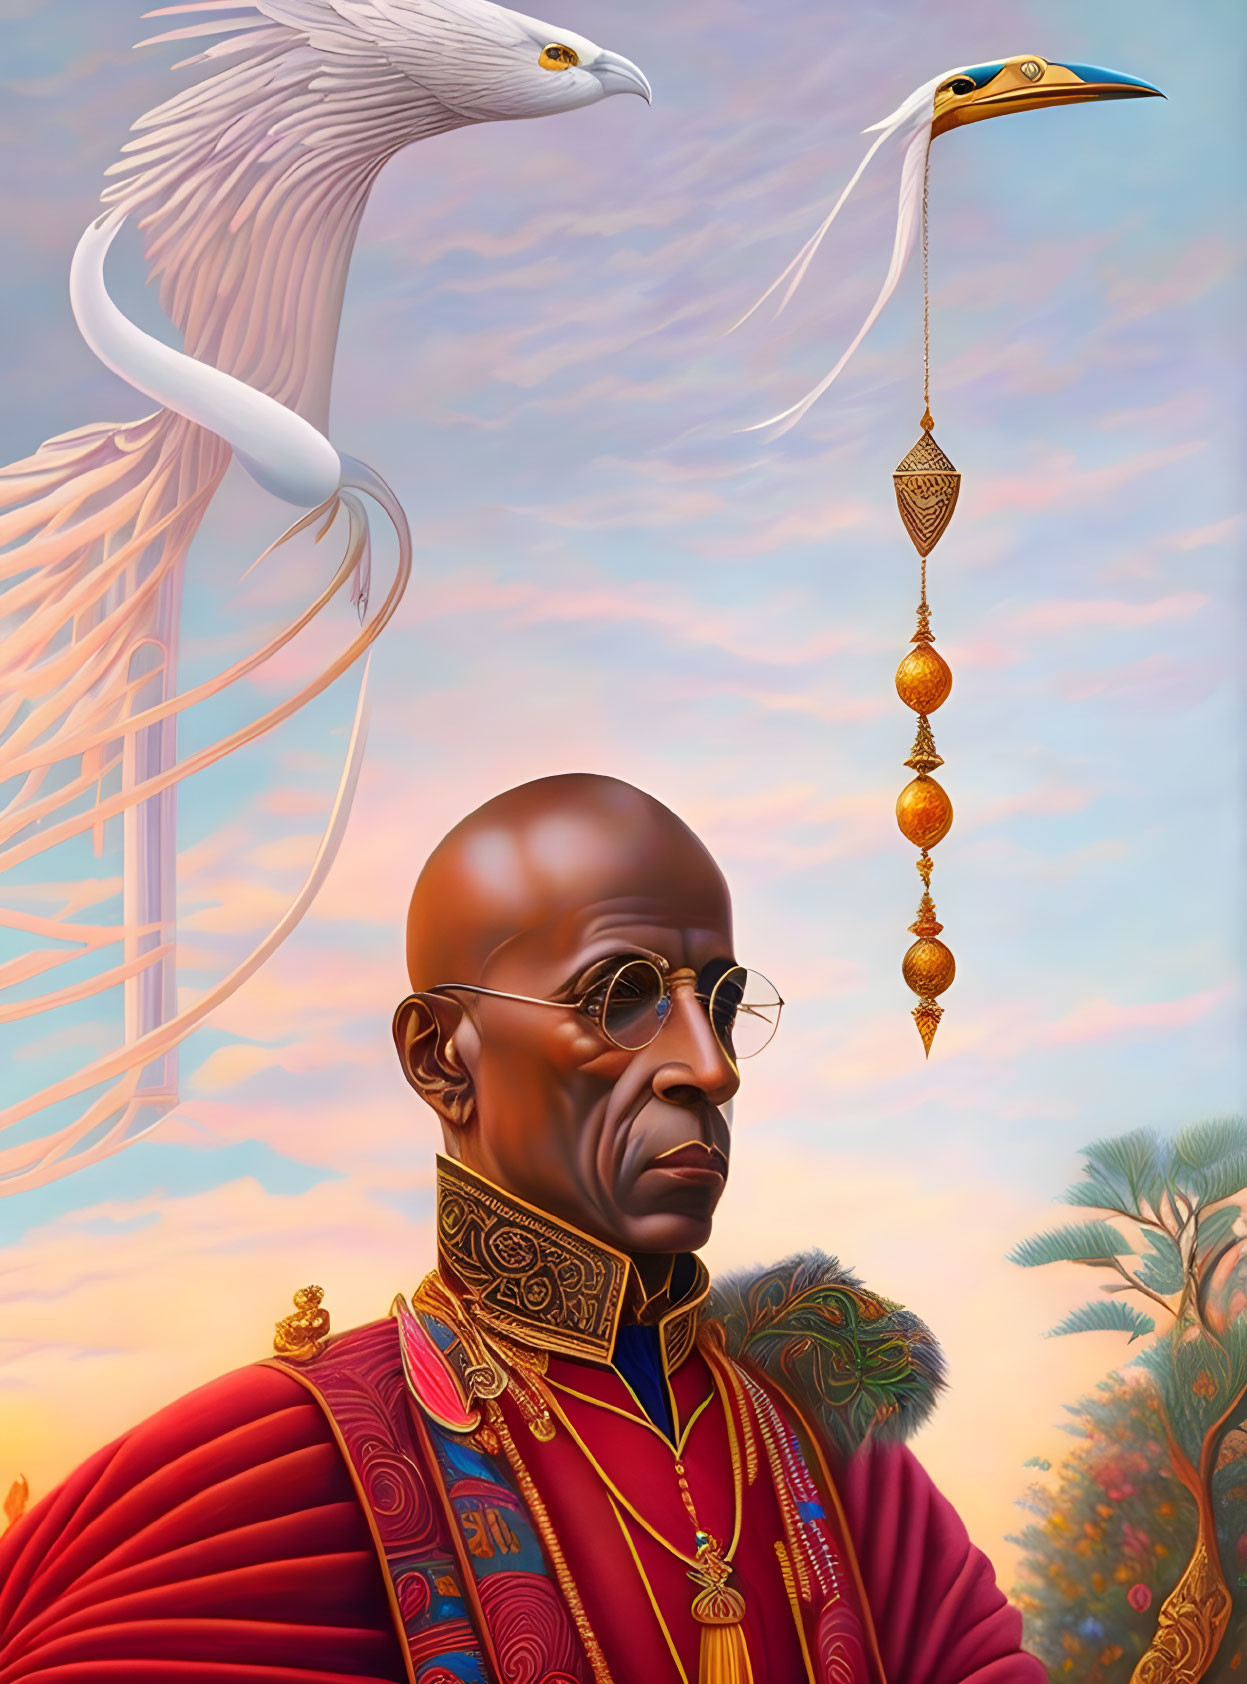 Regal bald figure in red and gold robes with glasses, accompanied by surreal white bird.